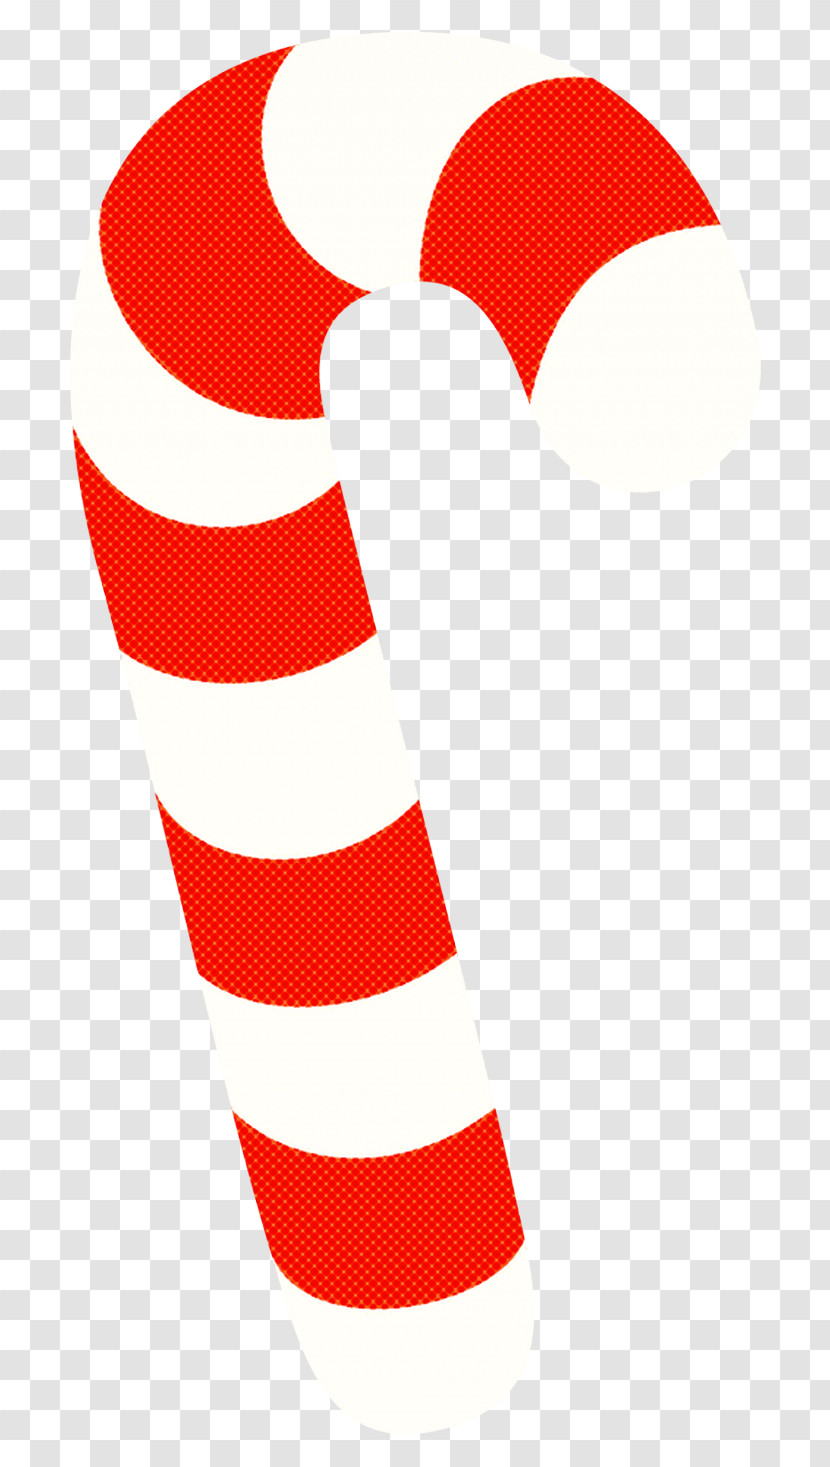 Candy Cane Transparent PNG